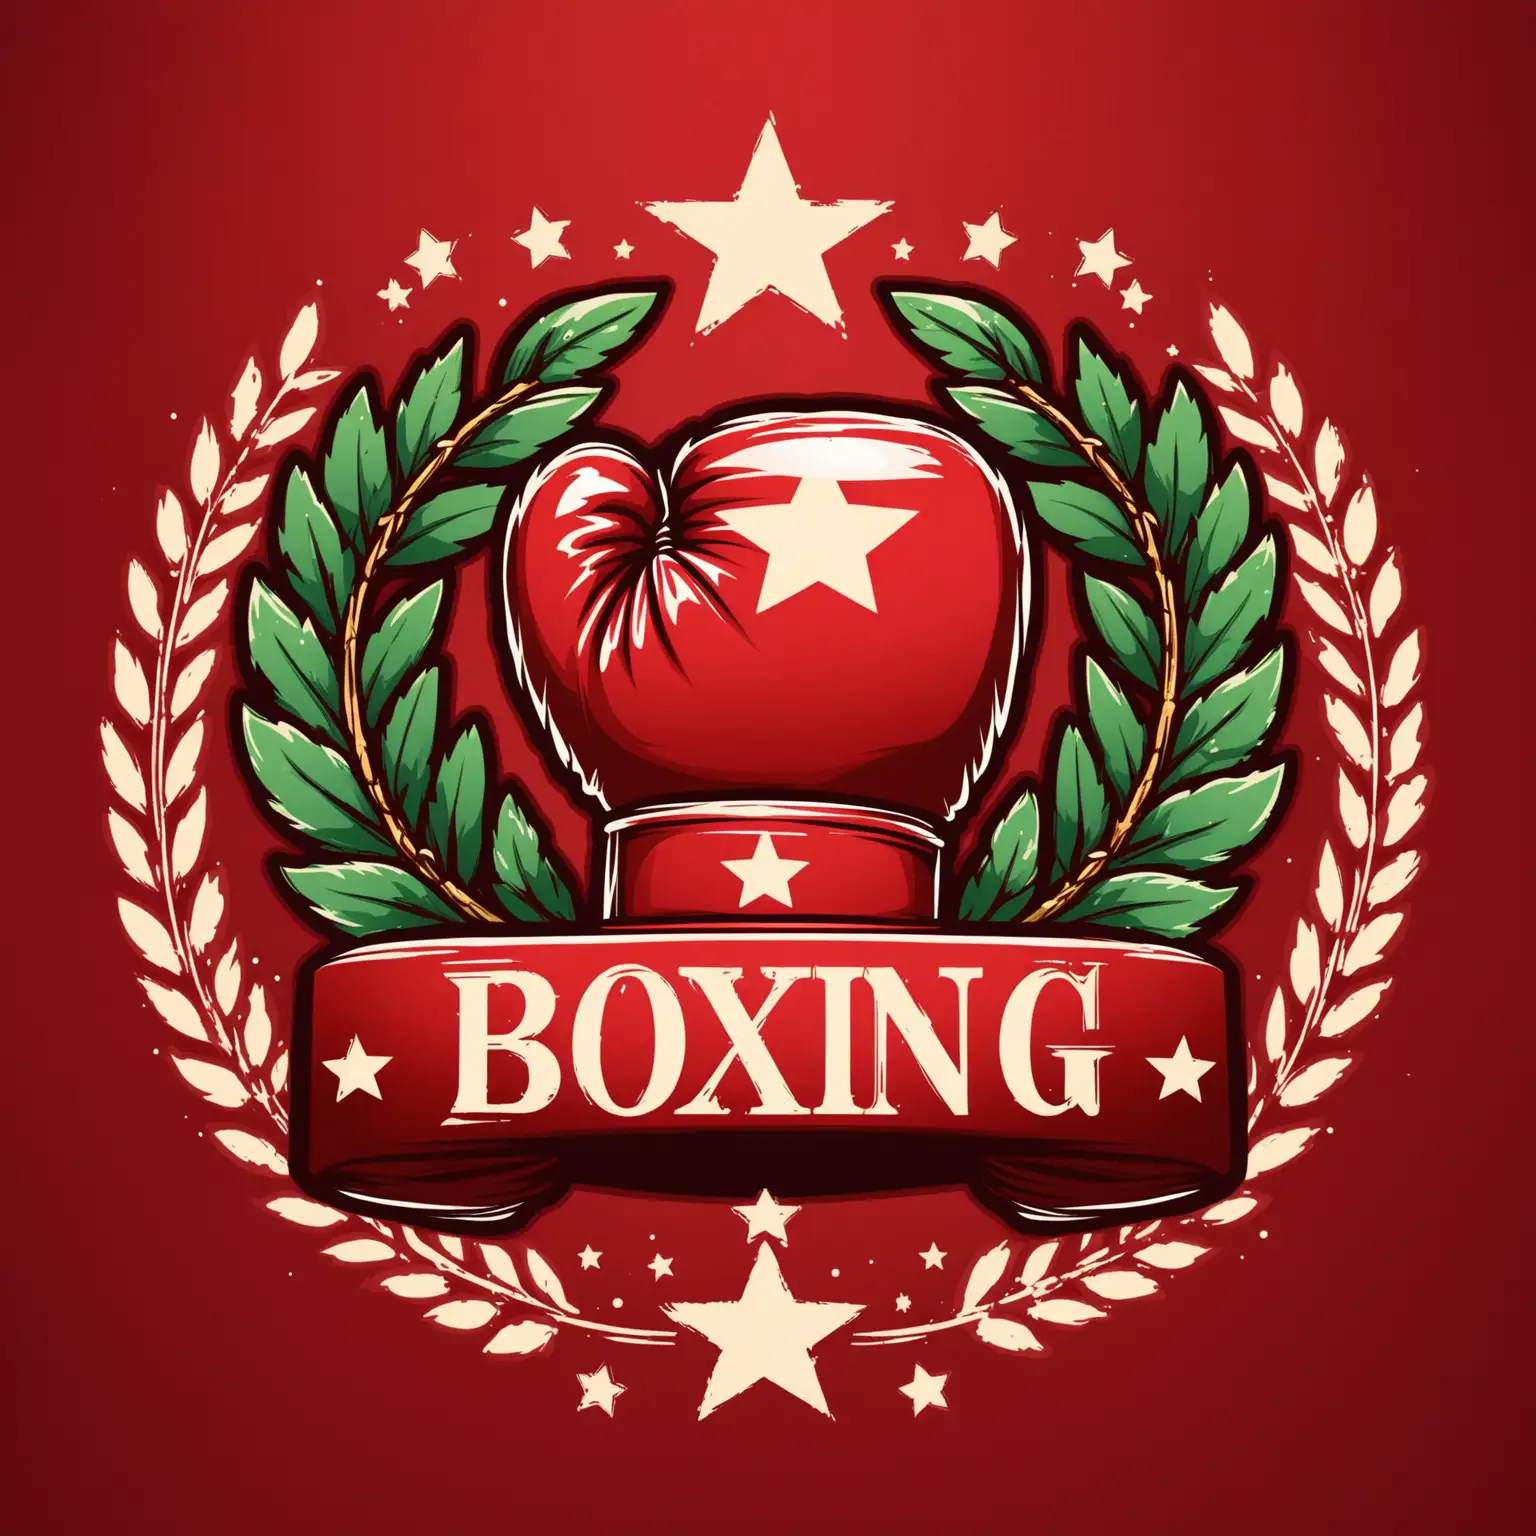 Dynamic Red Boxing Glove Logo with Laurel Leaves and Star